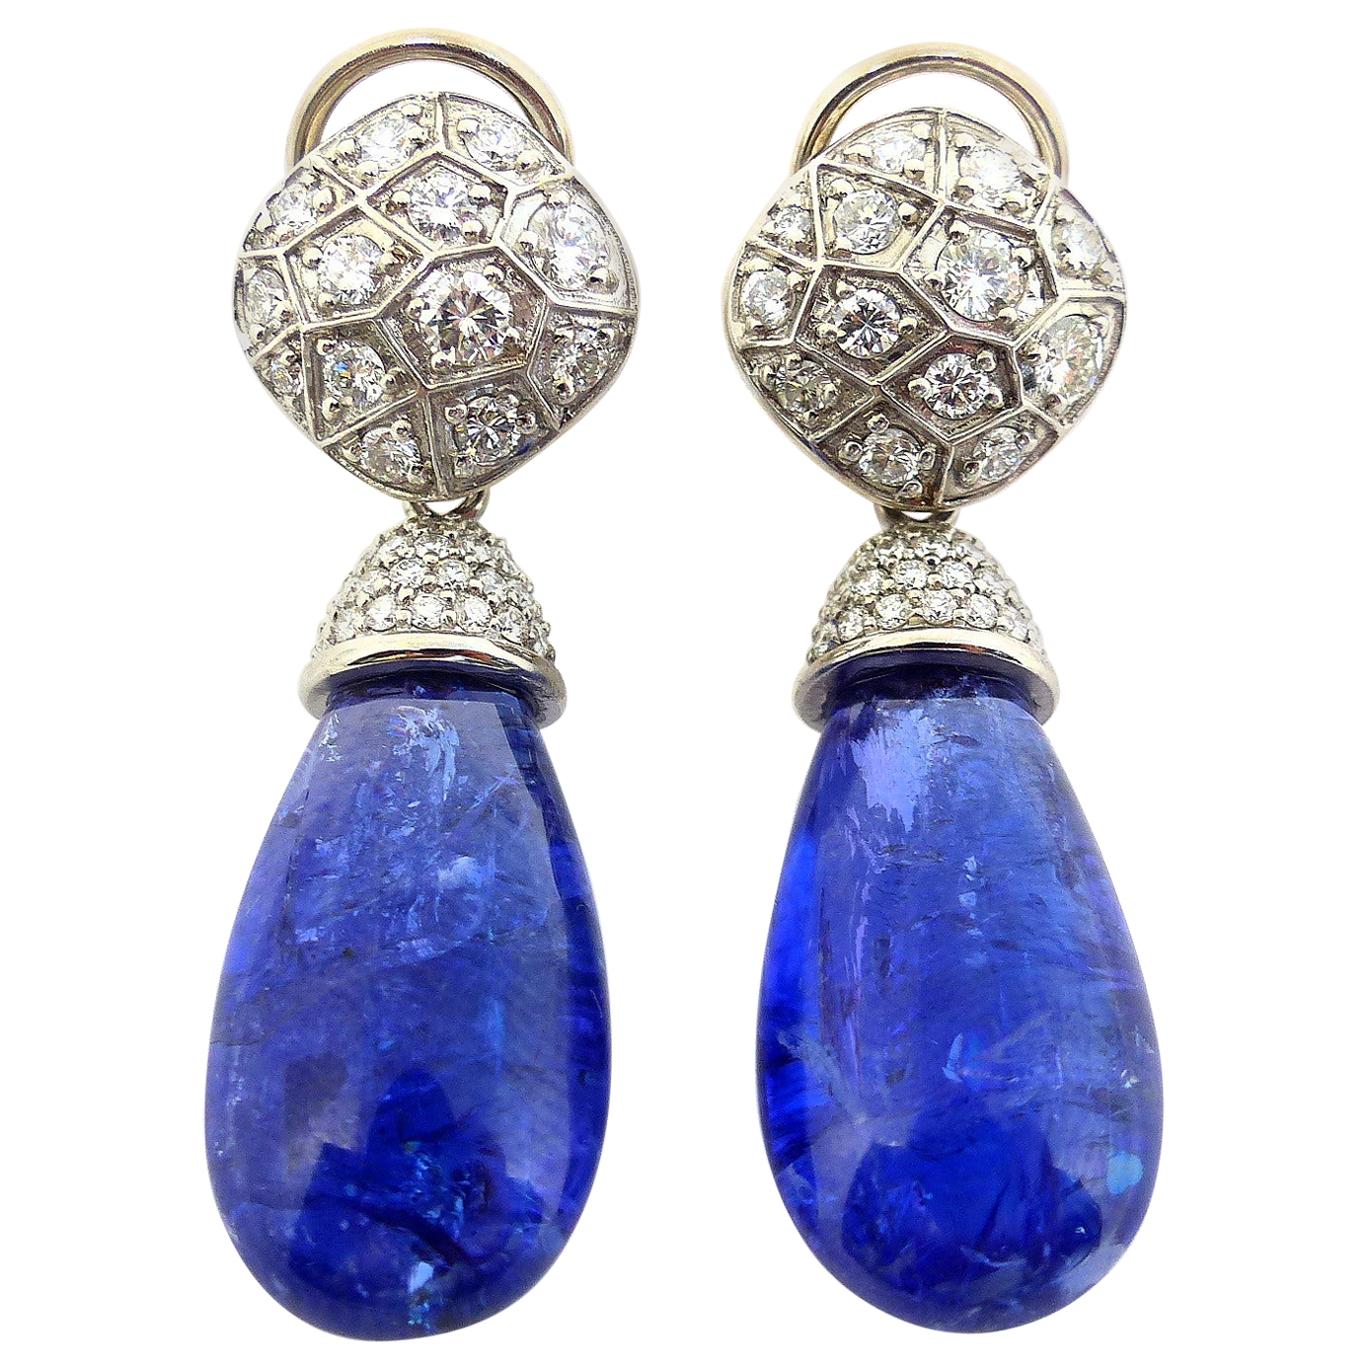 Earrings in White Gold with 2 Tanzanite Brioletts 41, 11ct. and Diamonds. For Sale